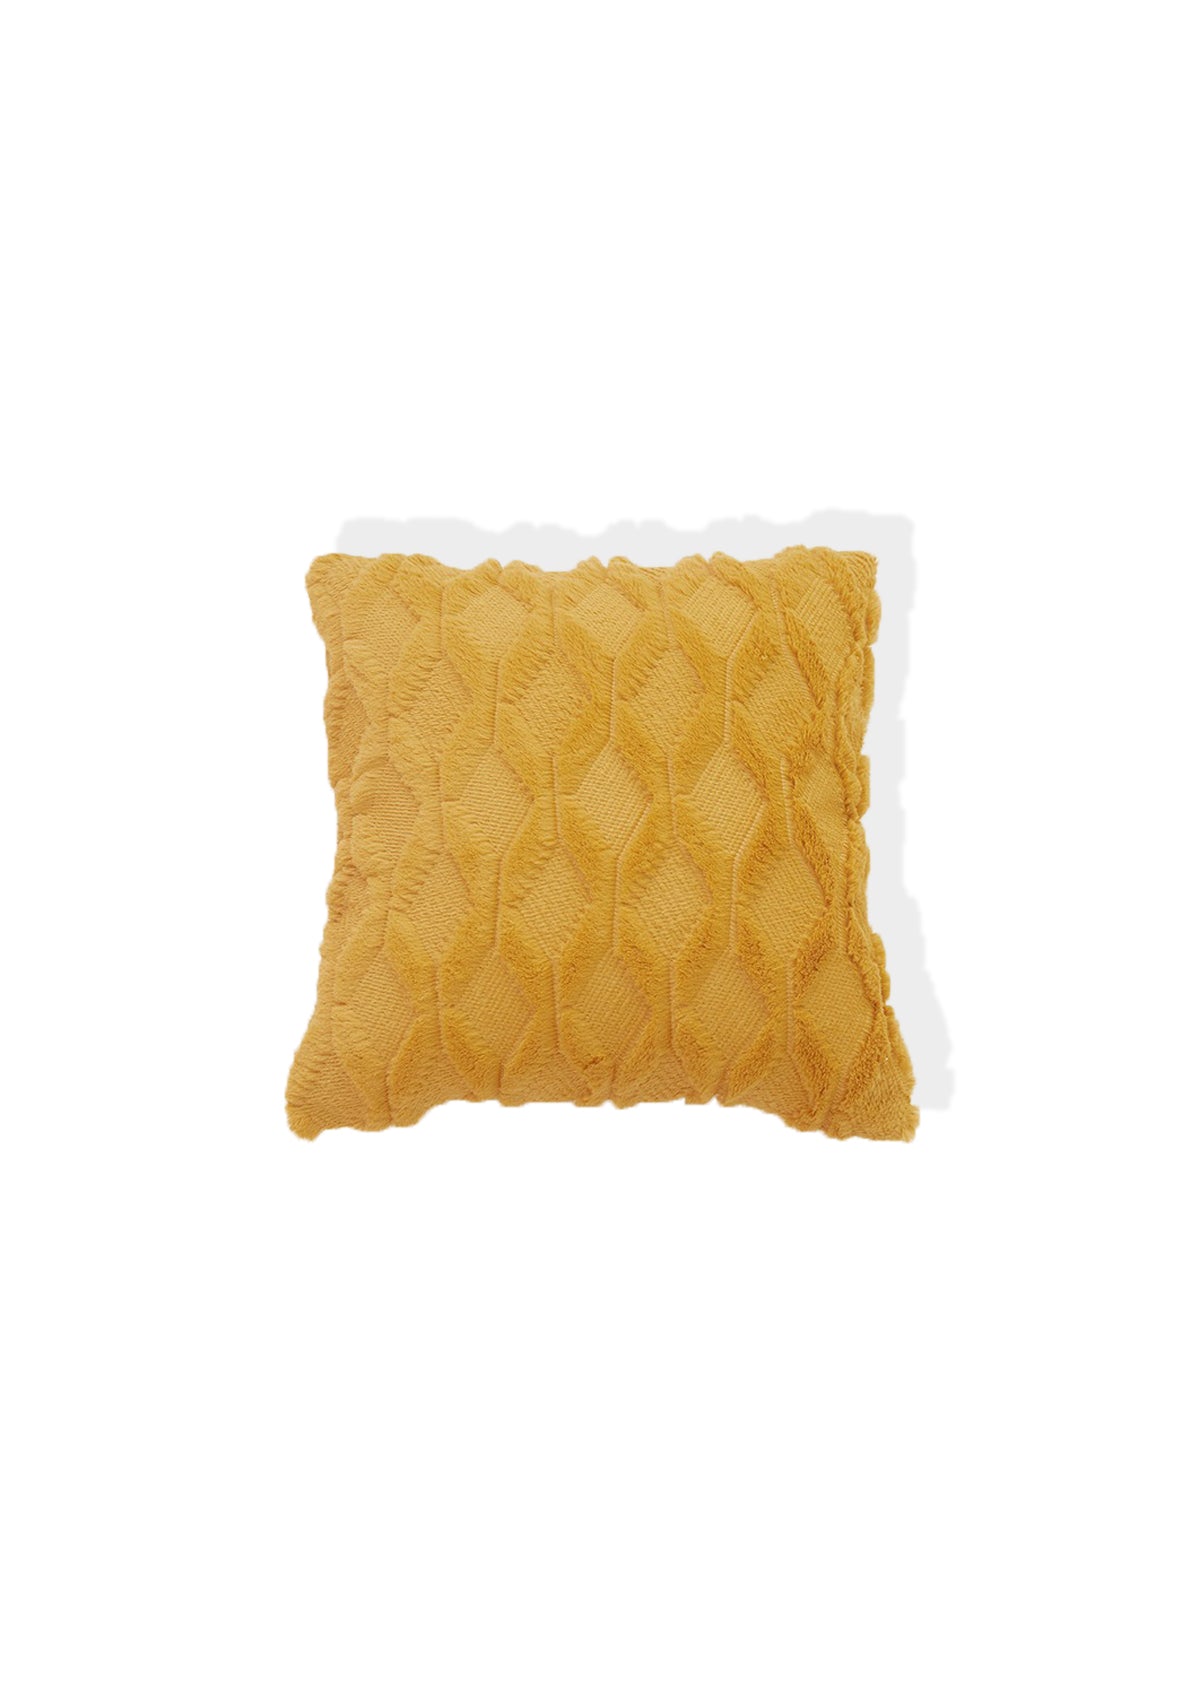 Yellow Fluffy Cushion Covers | CovermyCushion